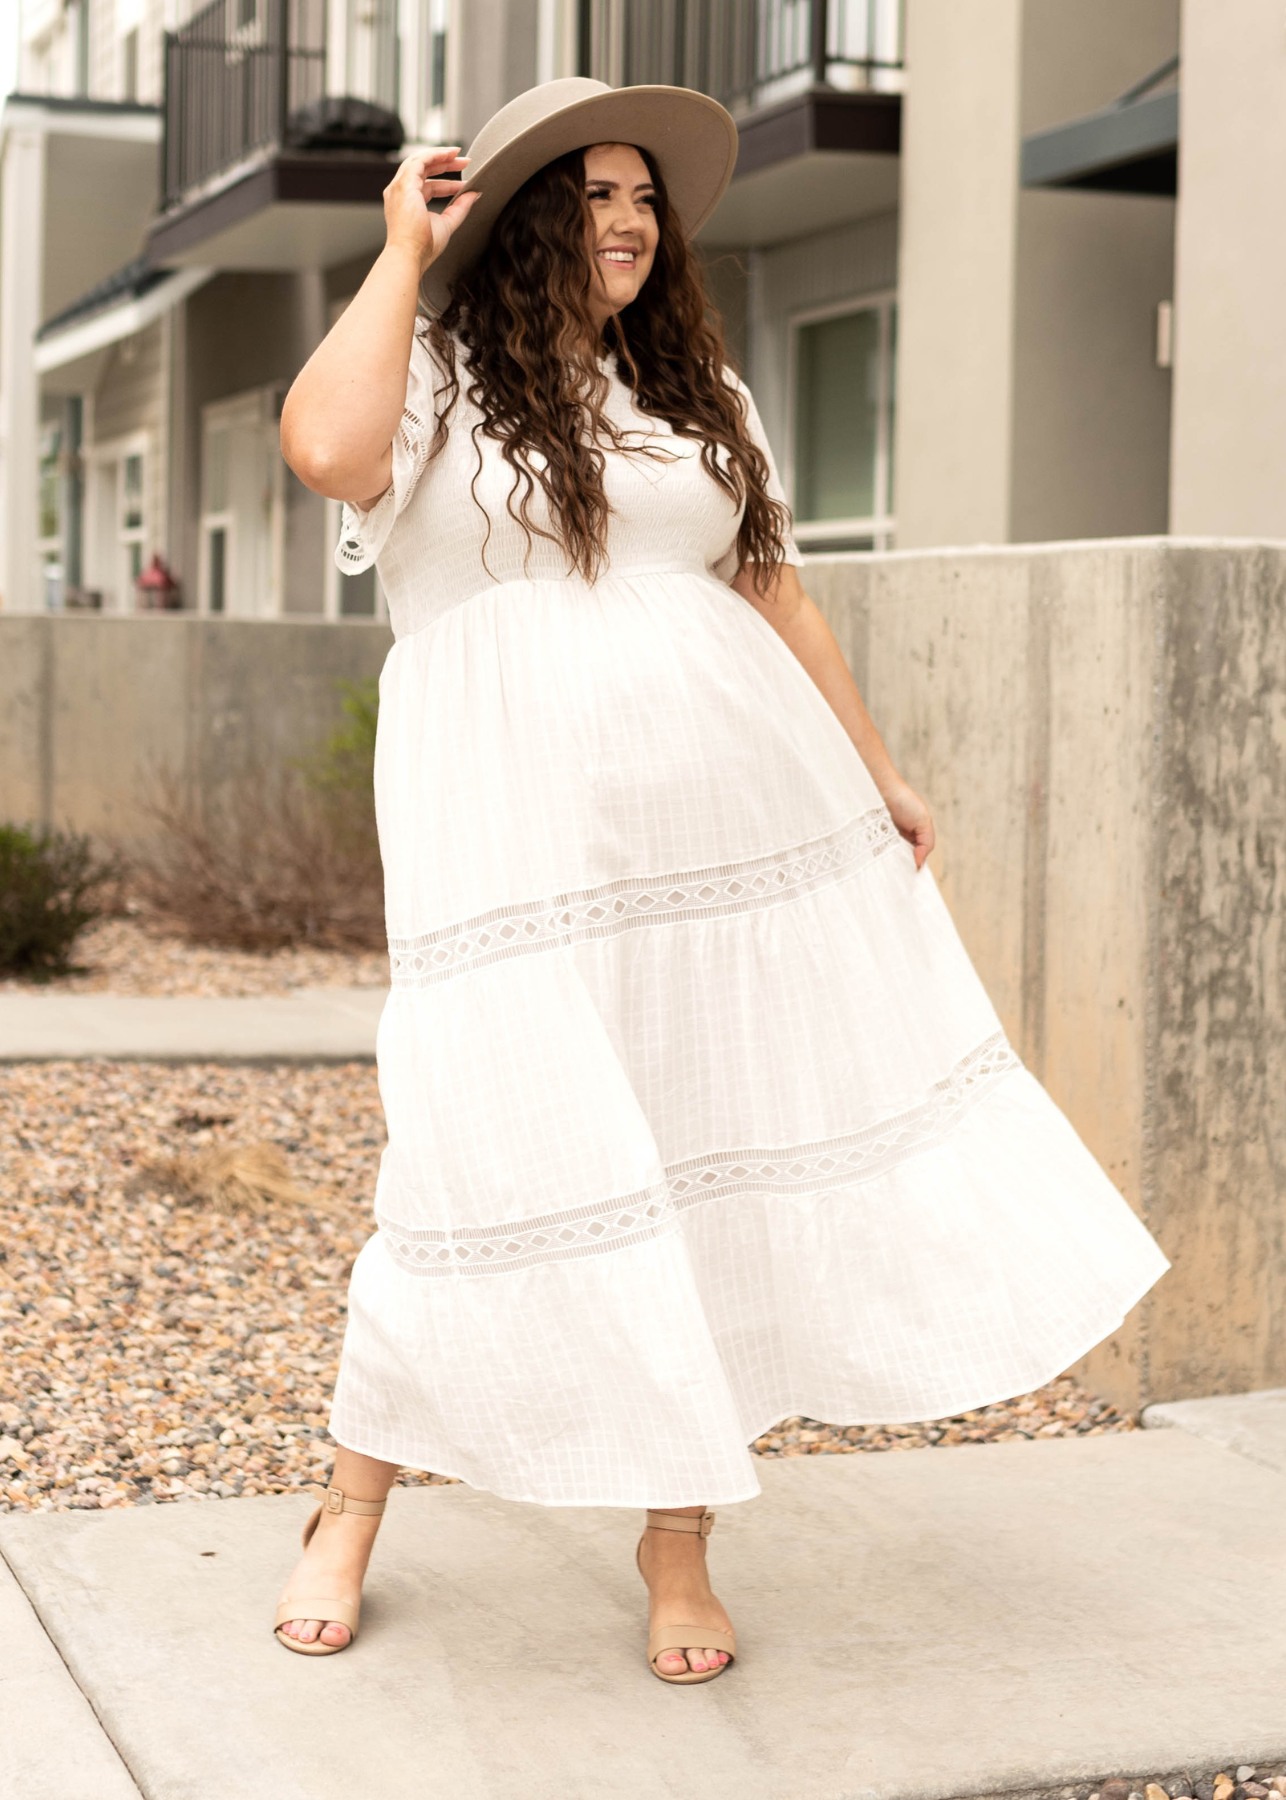 Short sleeve plus size white dress with lace detail